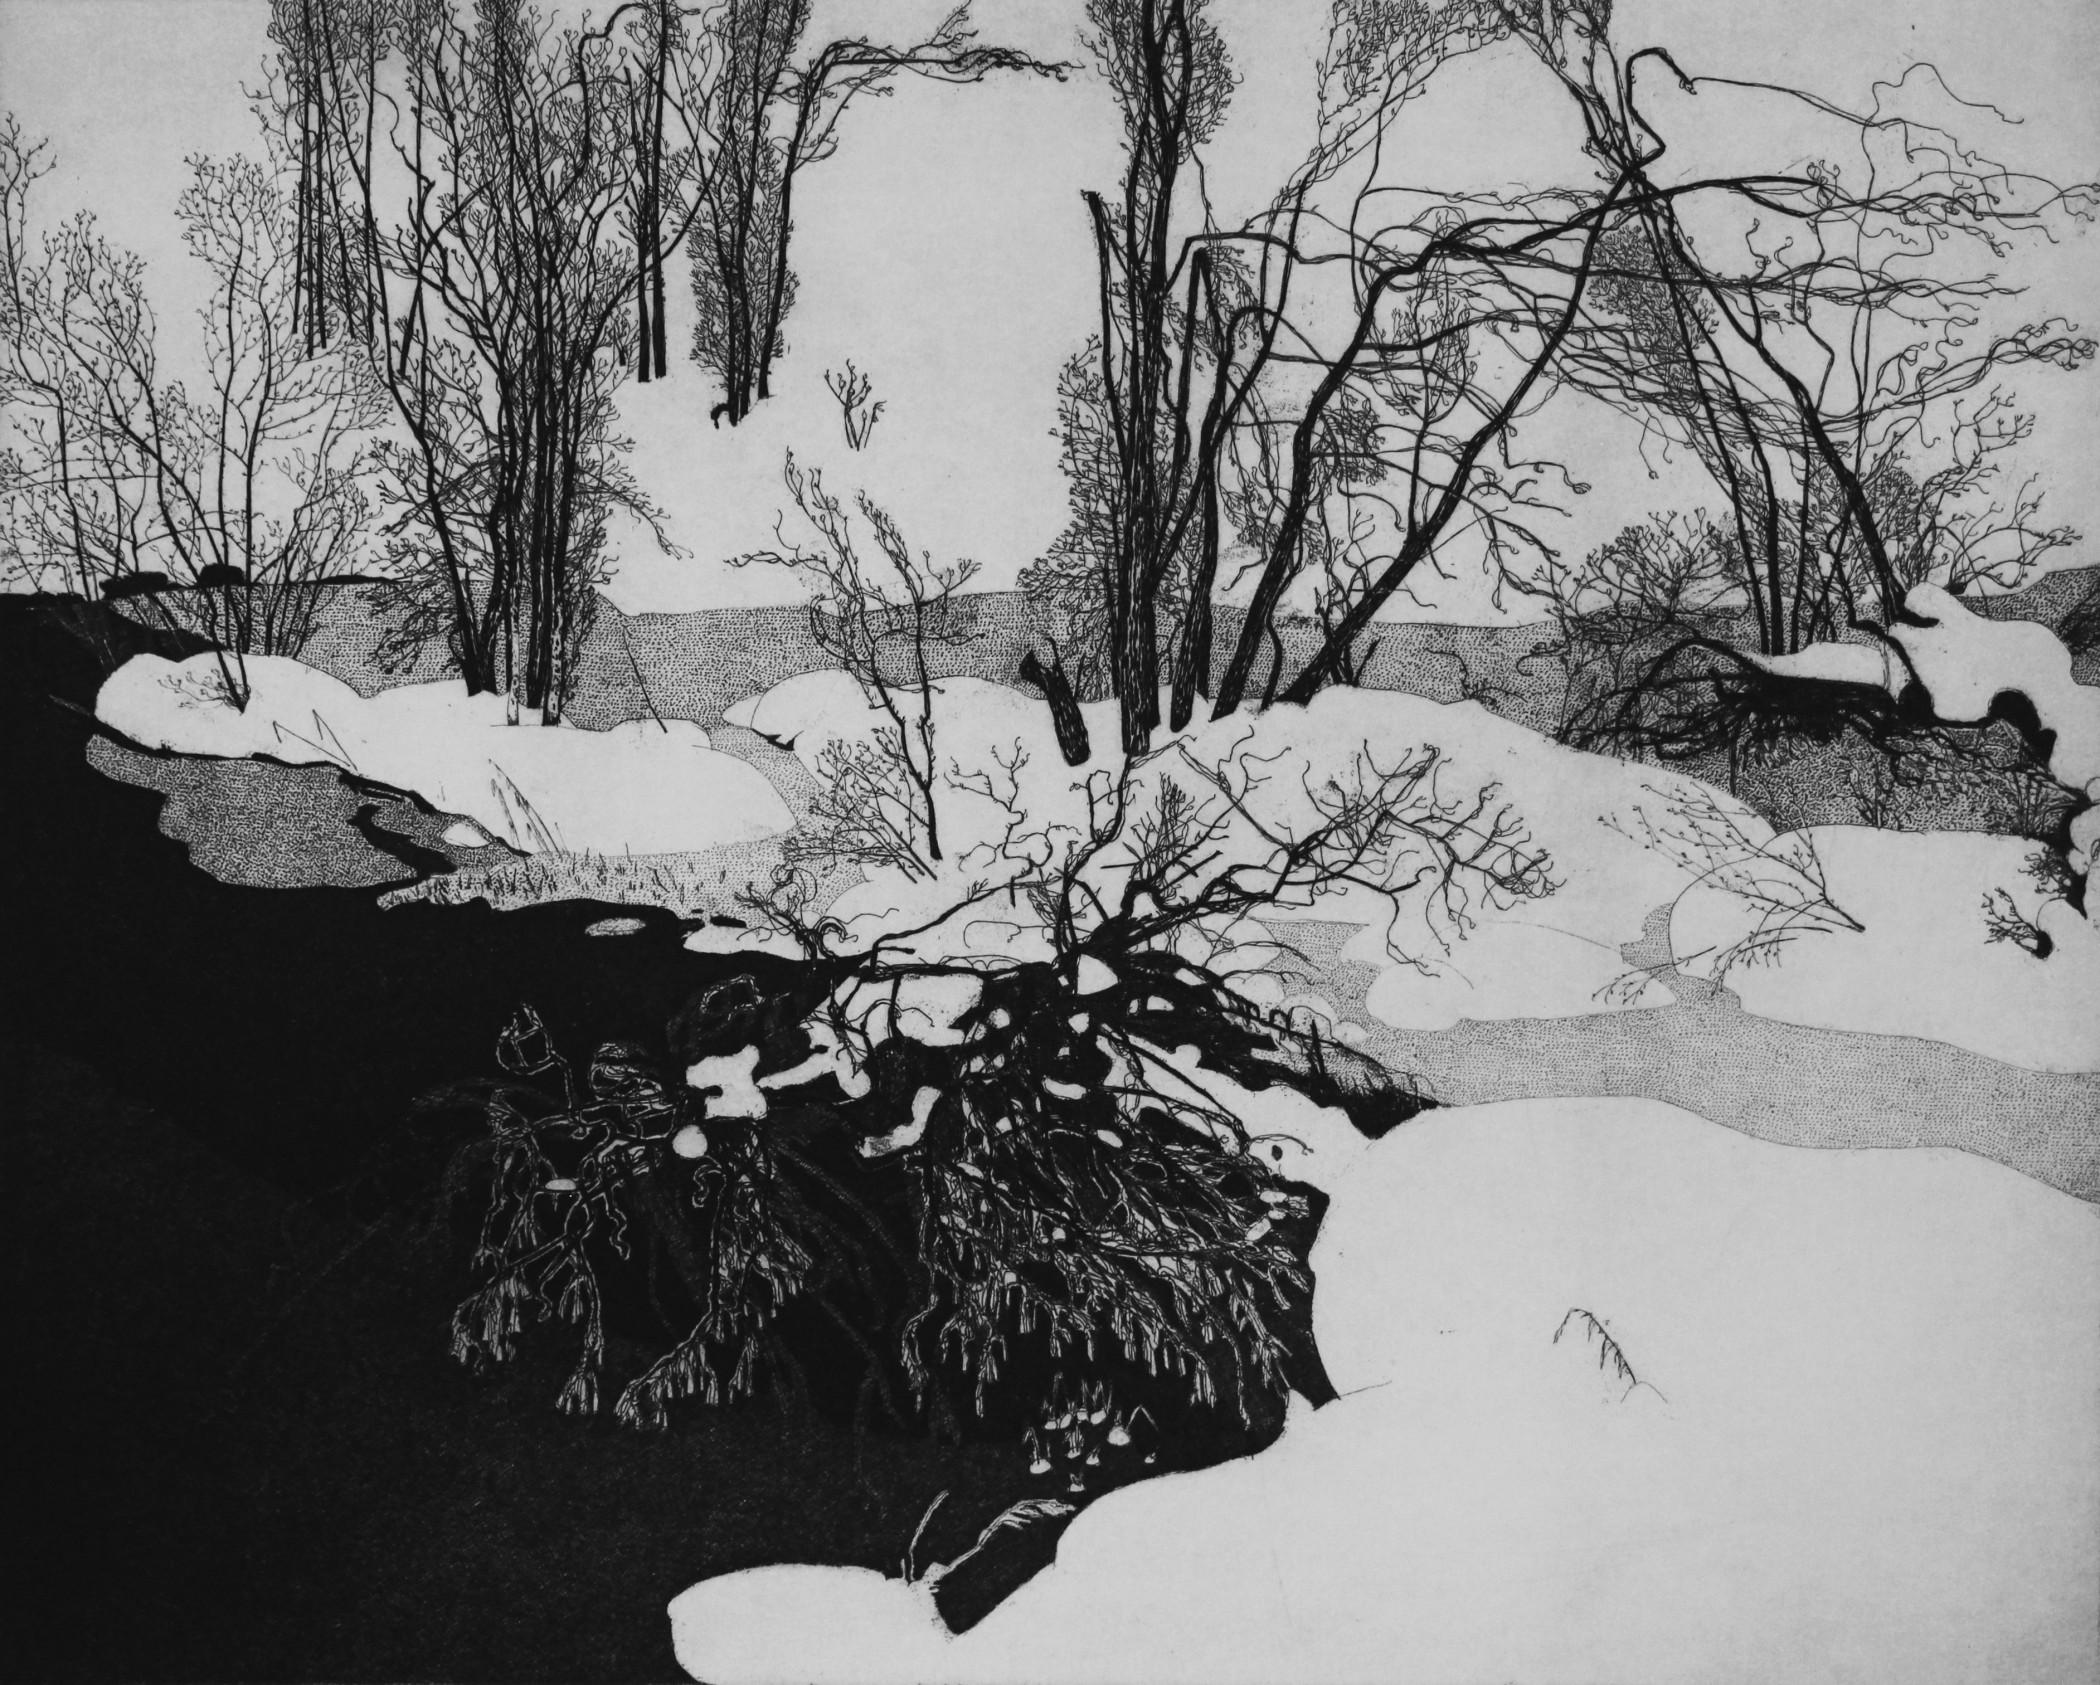 Snowed river, 1982, rif. 425

Etching inches 15.5 x 19.2 (mm 395 x 490). Contemporary Art

Etcher. A prominent figure of the art of engraving in Italy, Federica Galli was born in 1932 in Soresina – a village just outside Cremona. Straight after the